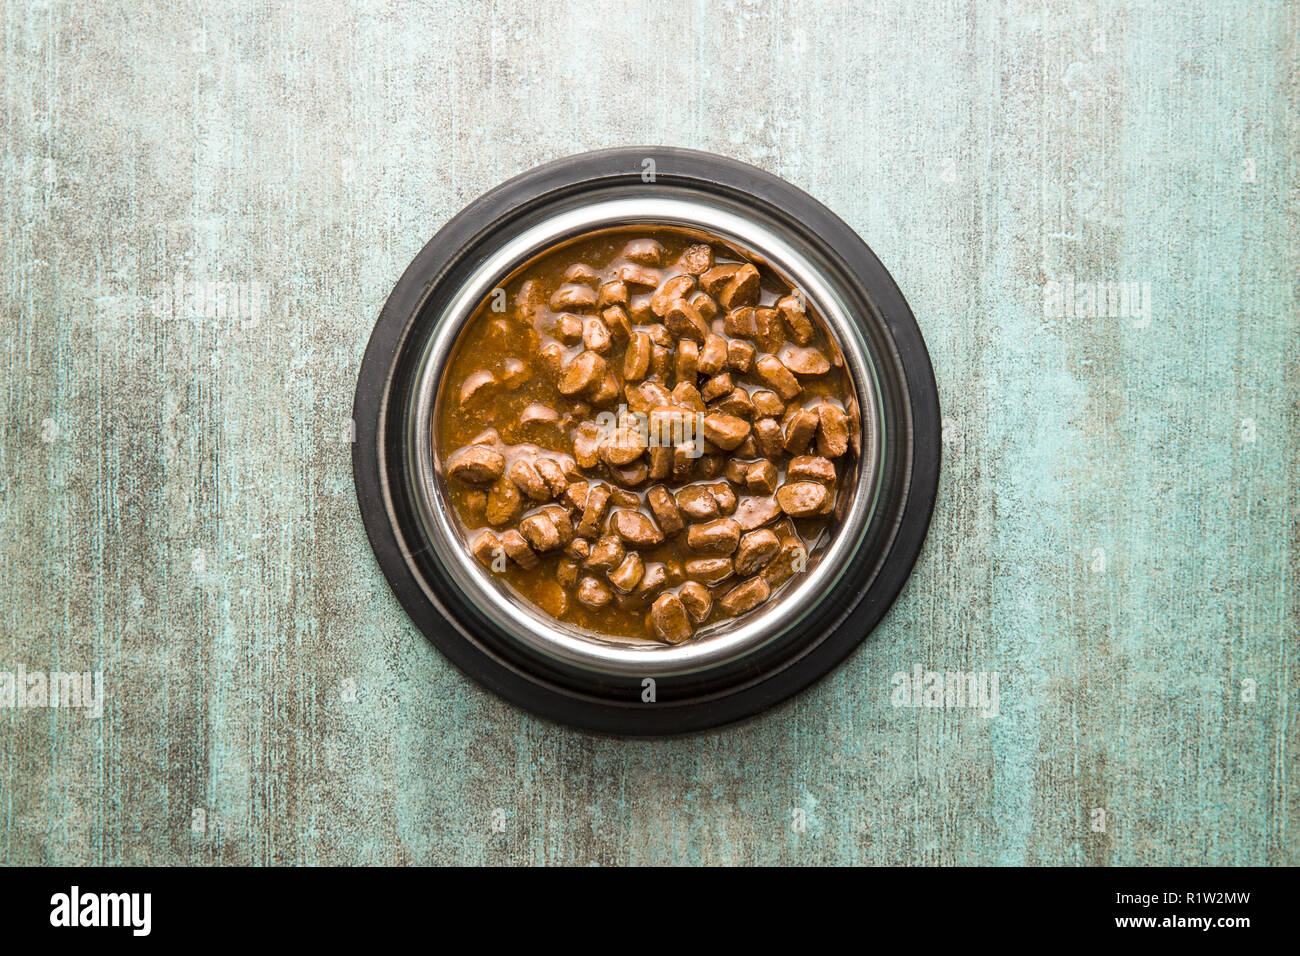 Meal for dog or cat. Canned meat with sauce in bowl. Stock Photo